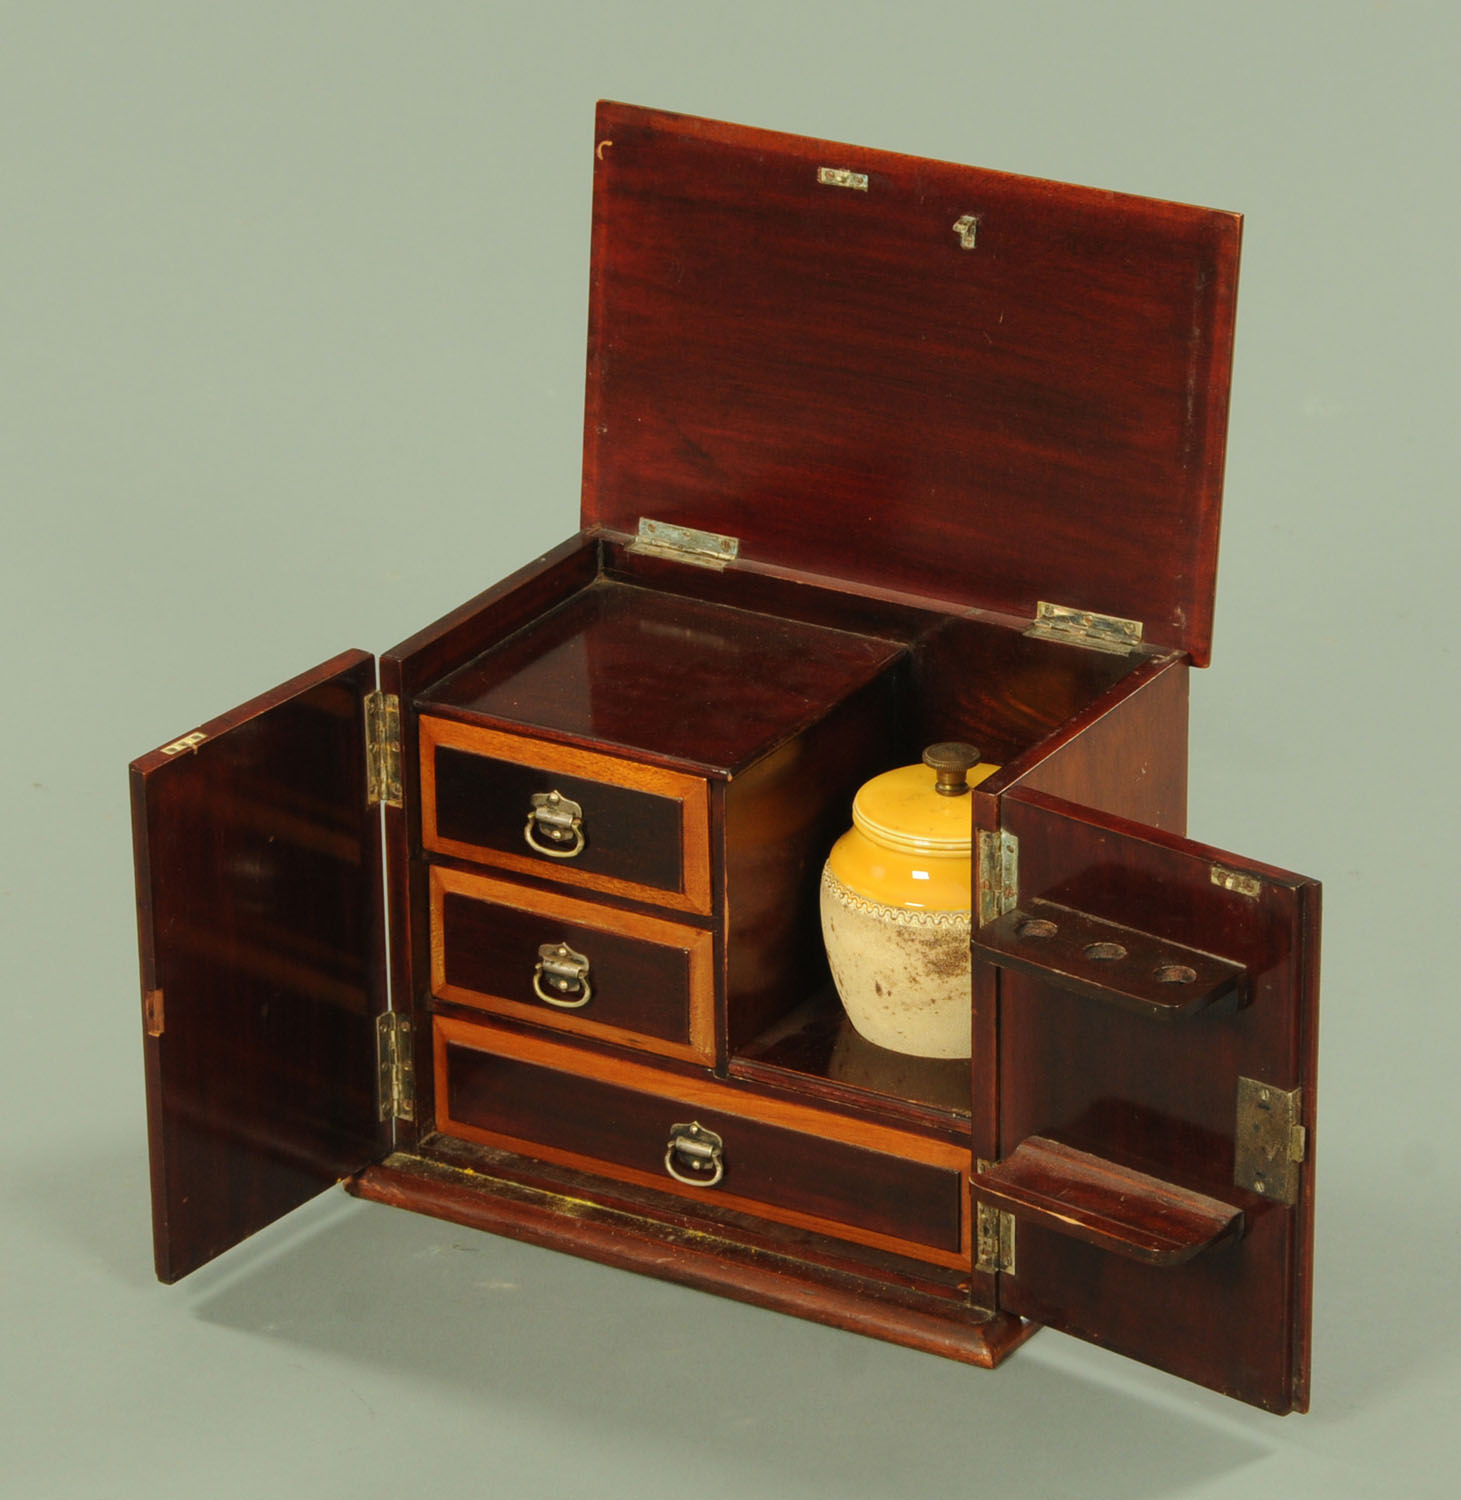 An Edwardian mahogany and inlaid tobacco chest, - Image 2 of 2